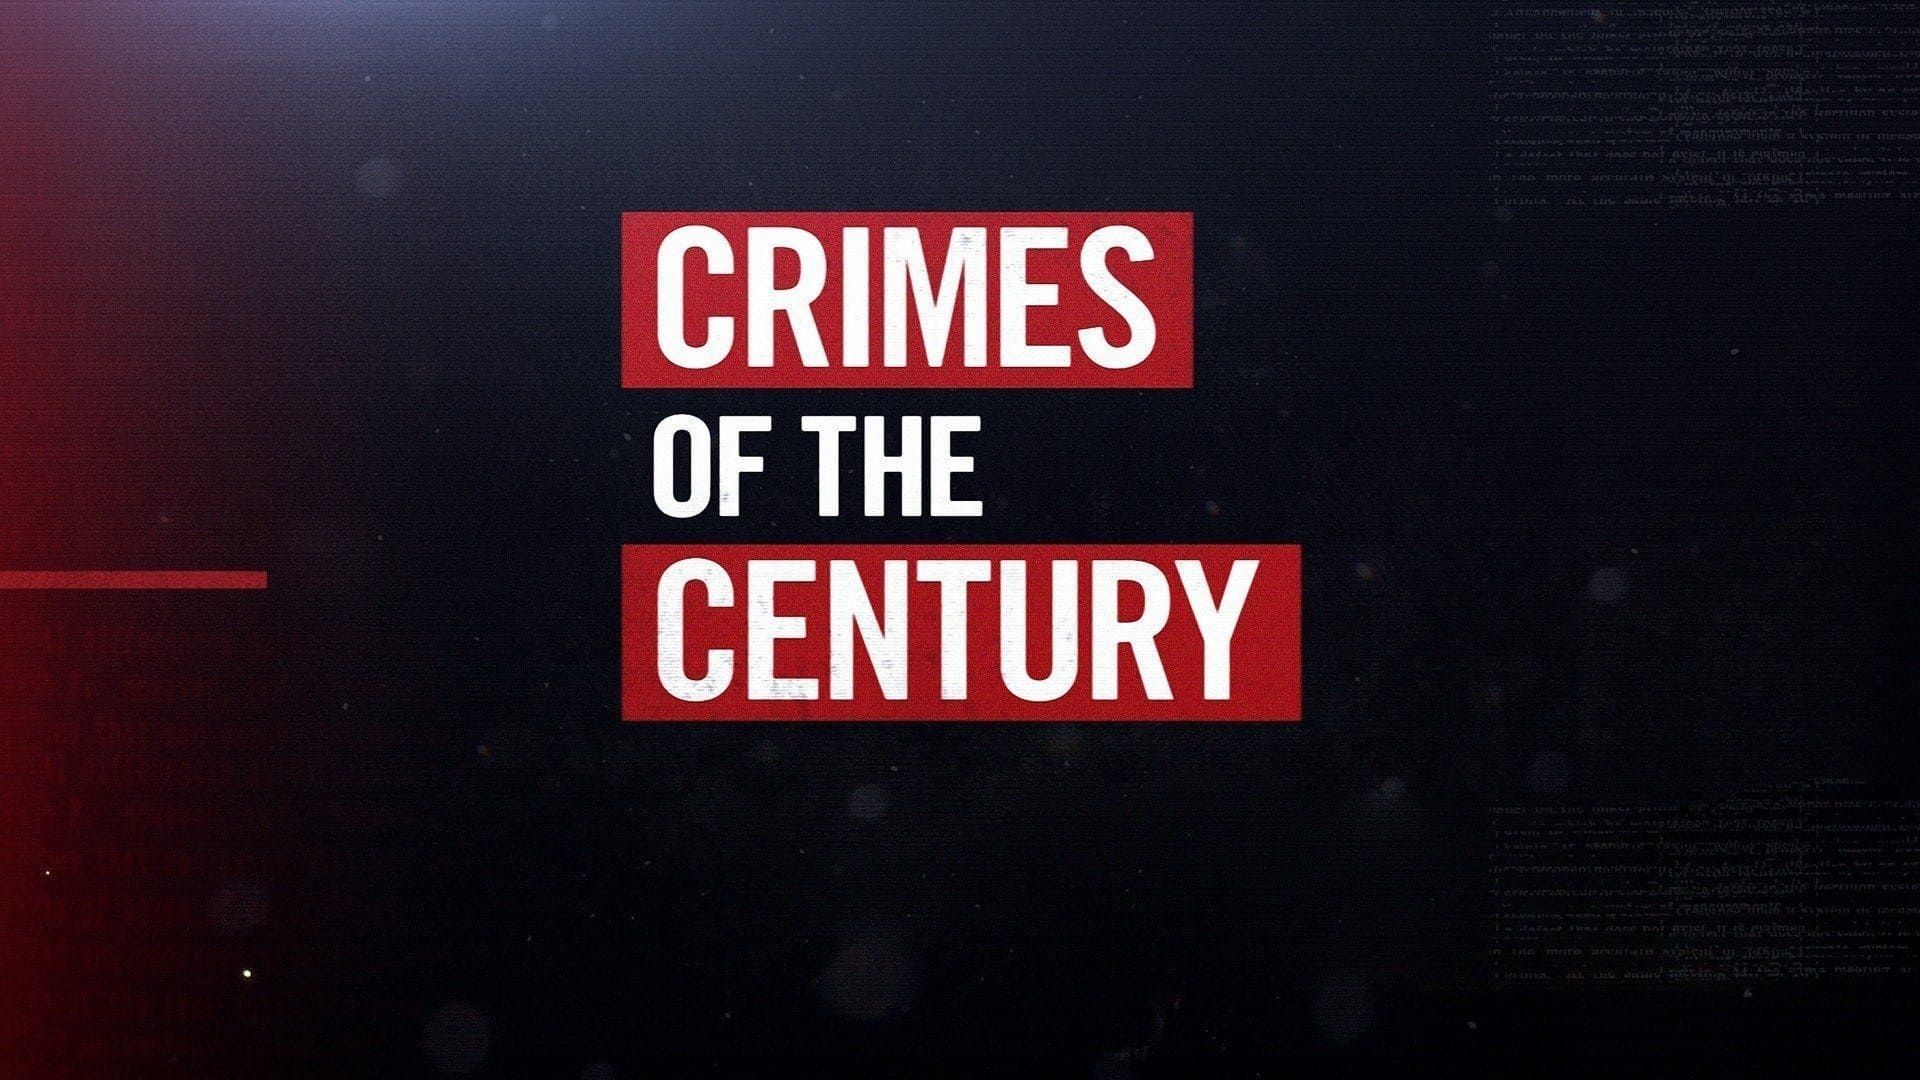 Crimes of the Century background